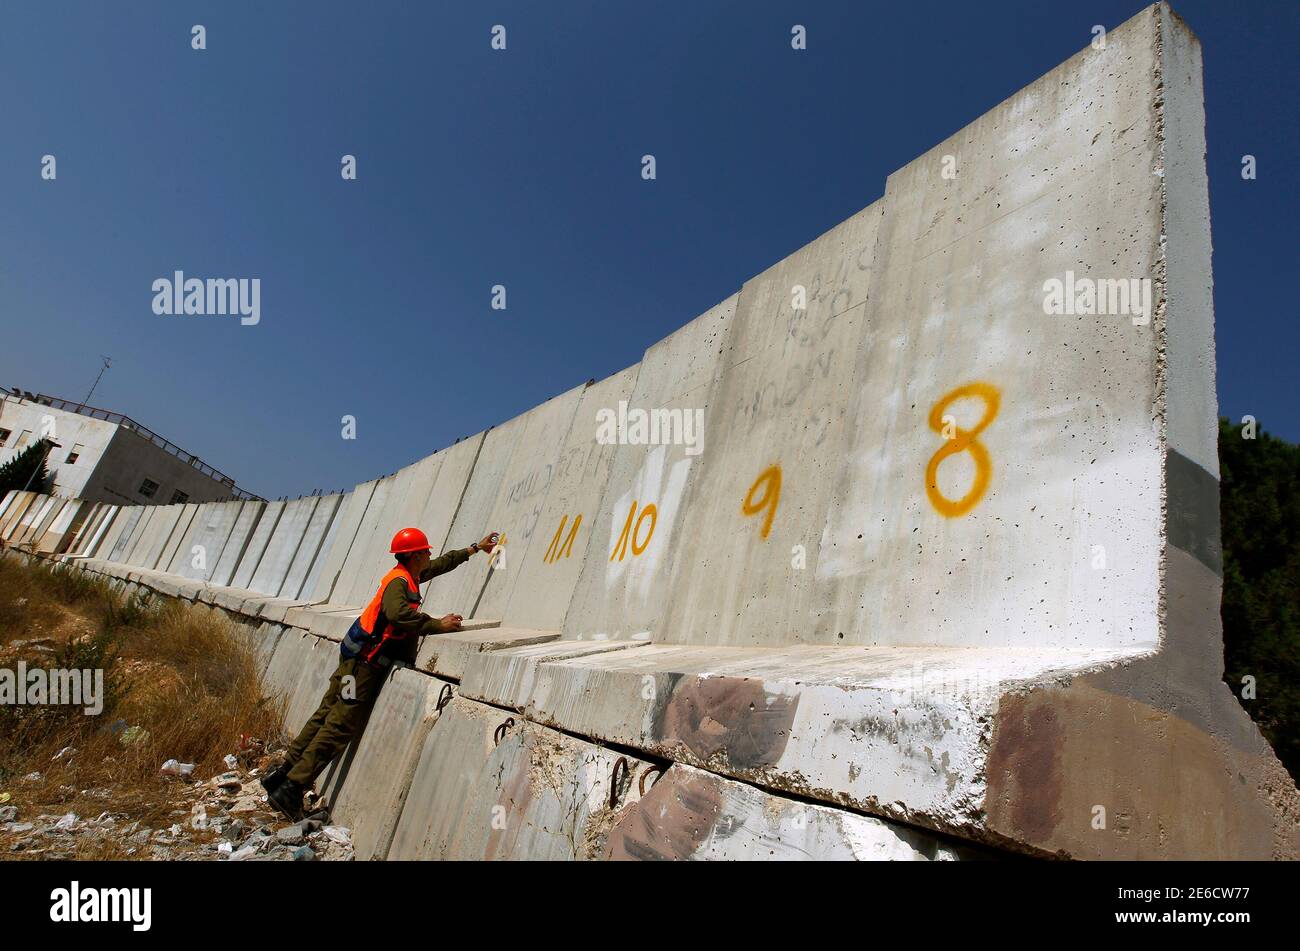 An Israeli soldier spray paints a number on a section of a concrete wall in Gilo, a Jewish settlement on land Israel captured in 1967 and annexed to its Jerusalem municipality before it is removed August 15, 2010. In a sign of improved stability in the West Bank, Israel is removing the concrete blast walls put up eight years ago to shield the settlement on Jerusalem's outskirts from Palestinian gunfire and shells.  REUTERS/Baz Ratner (POLITICS CIVIL UNREST) Stock Photo